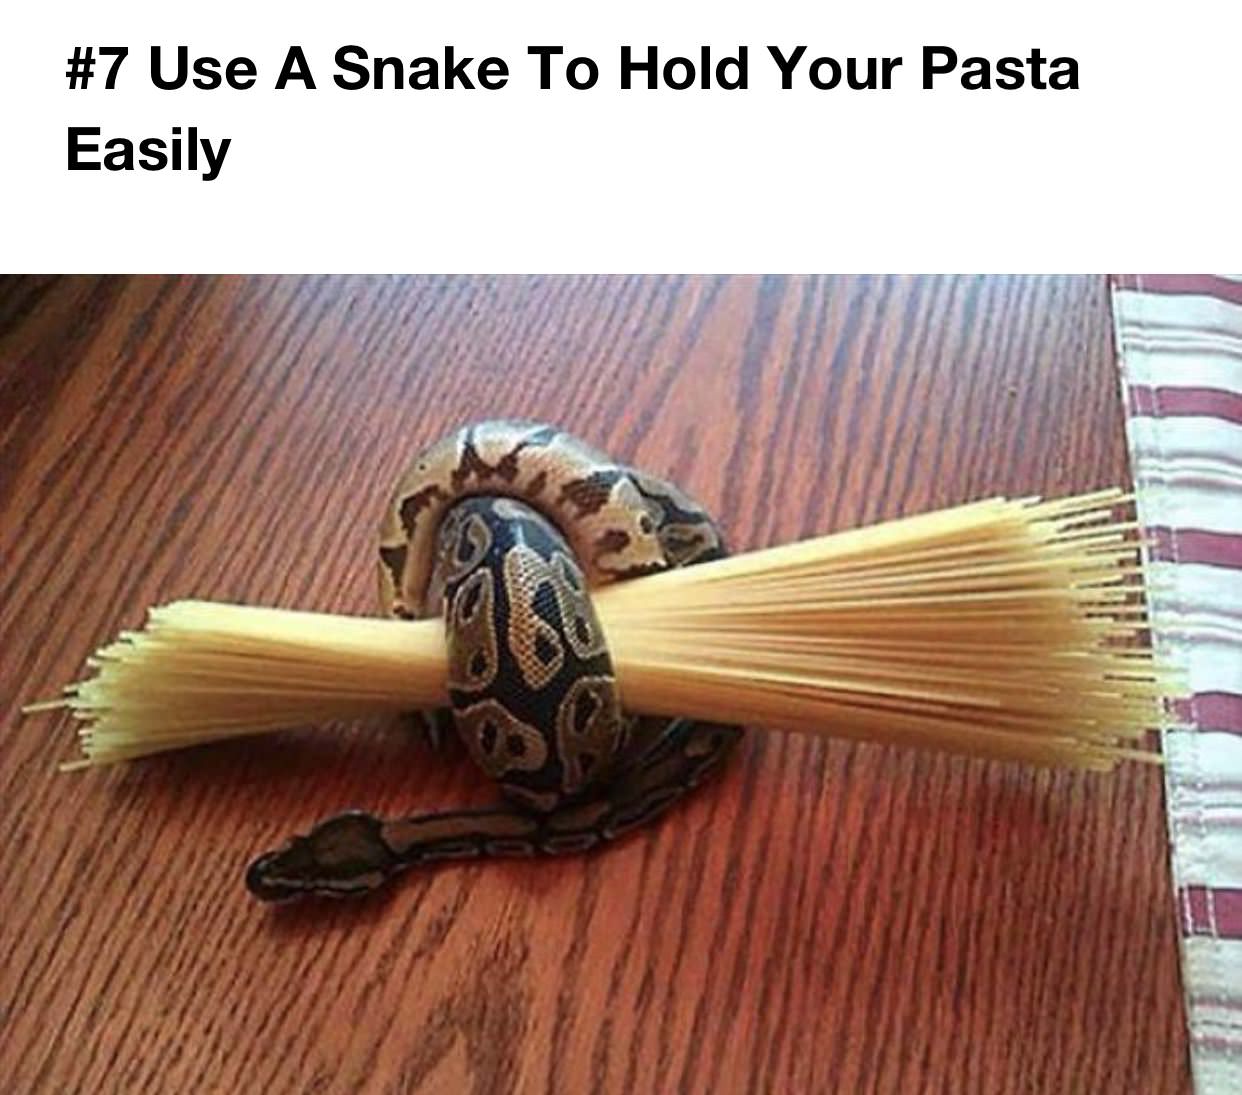 snake pasta - Use A Snake To Hold Your Pasta Easily